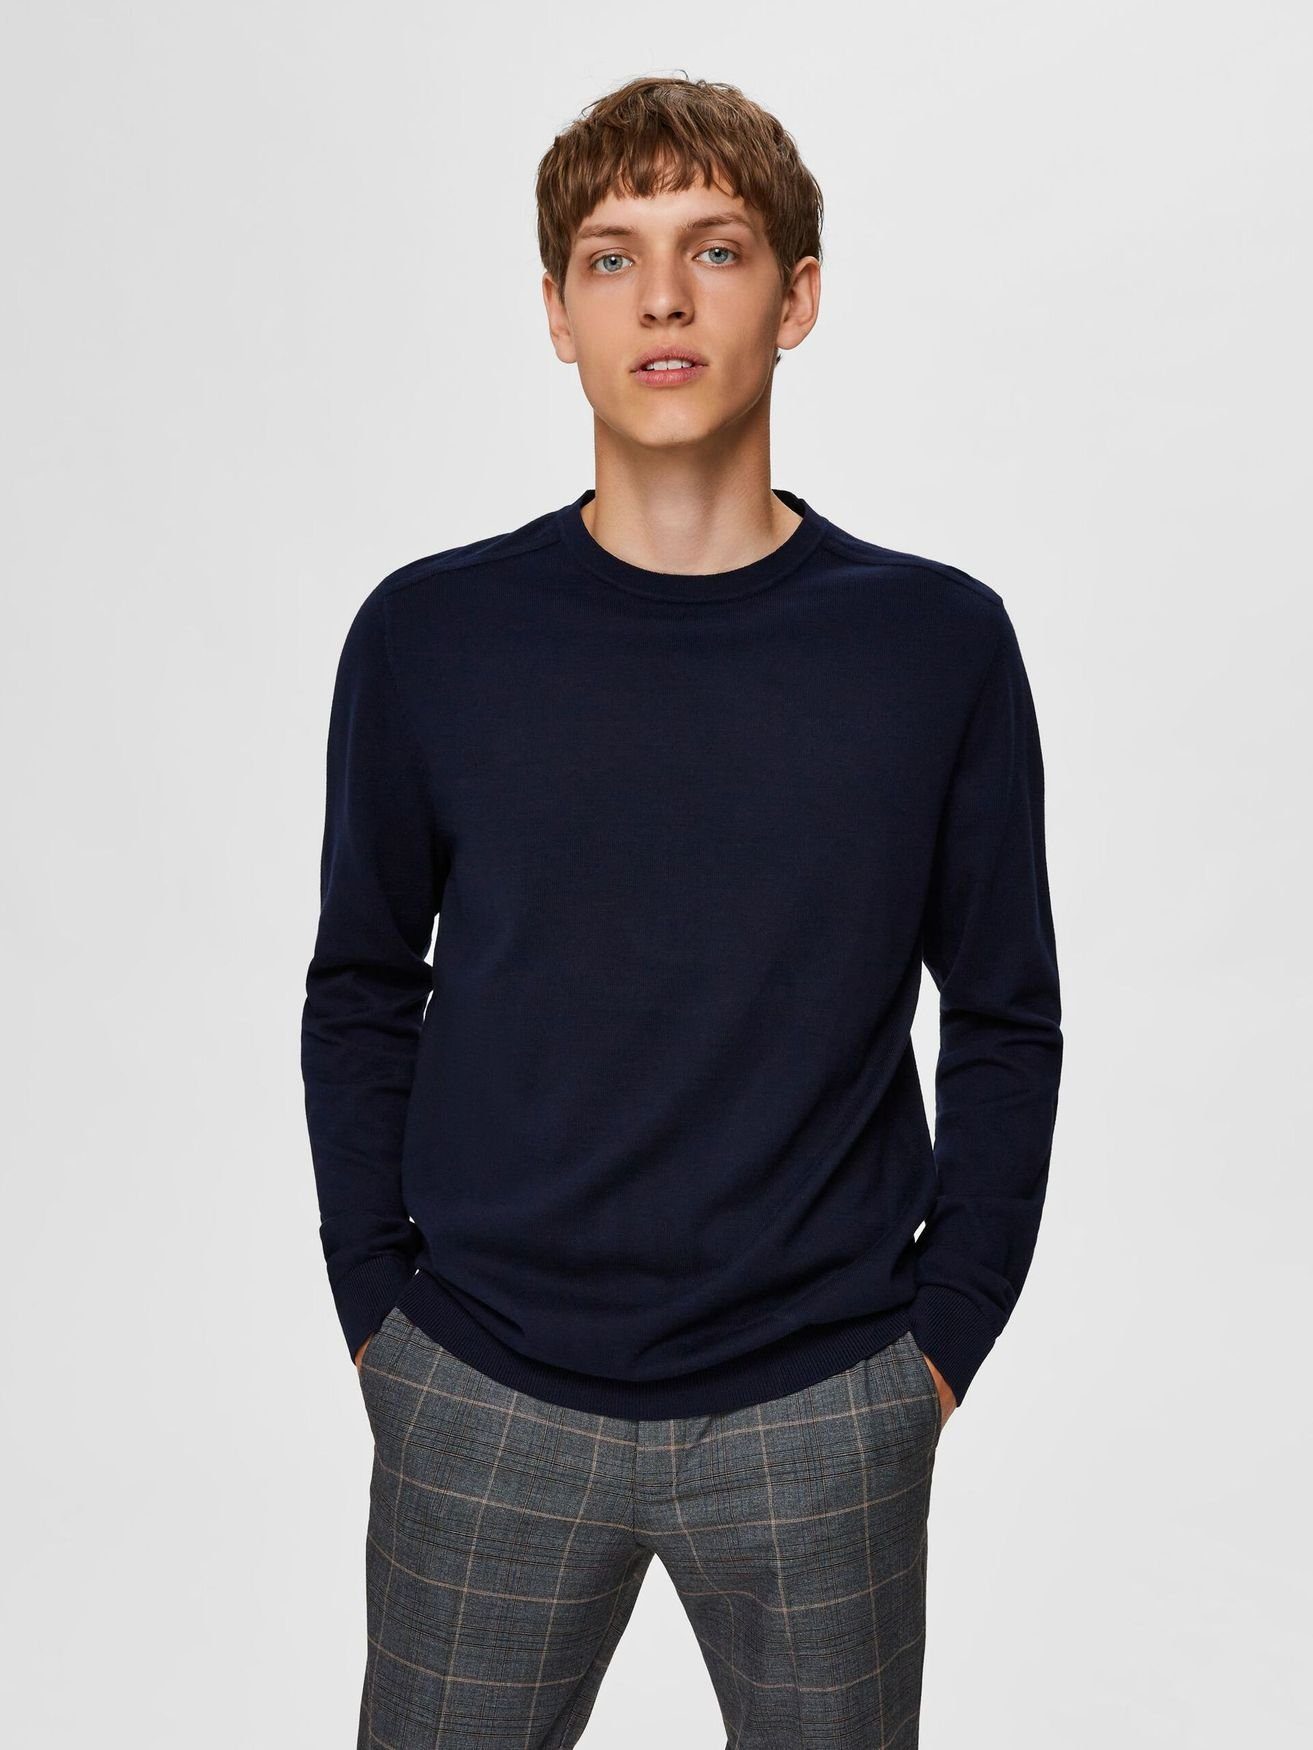 SELECTED HOMME Strickpullover »Herren SELECTED Feinstrick Pullover Basic  Rundhals Sweater SLHBERG« (1-tlg) 3860 in Navy online kaufen | OTTO